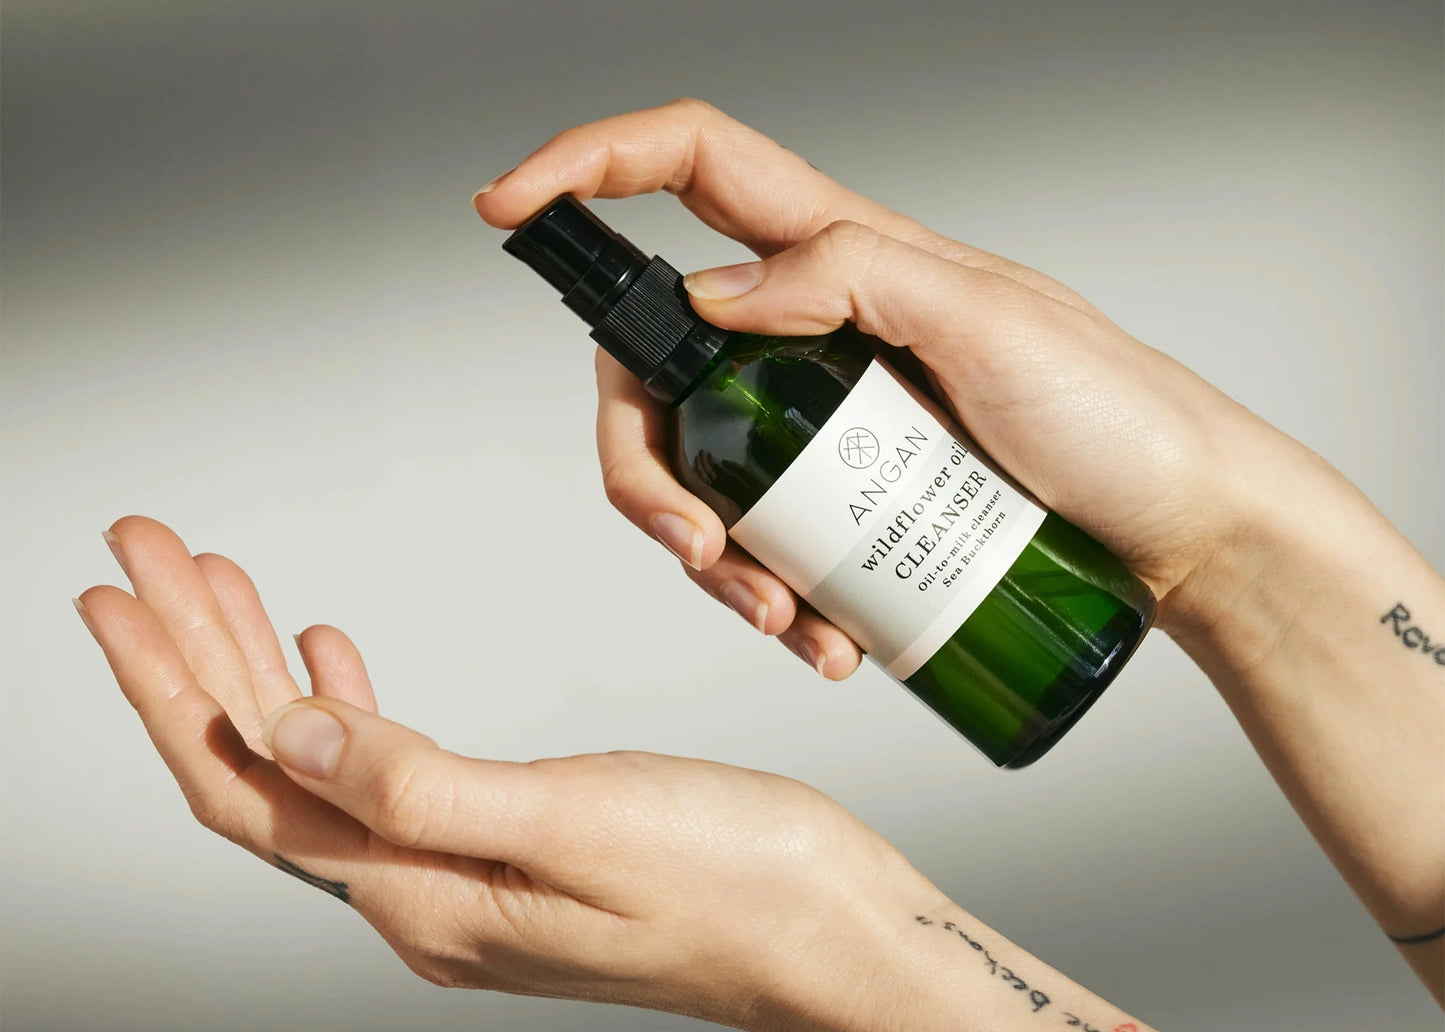 Wildflower Oil Cleanser by Angan from Iceland being squirted onto a hand